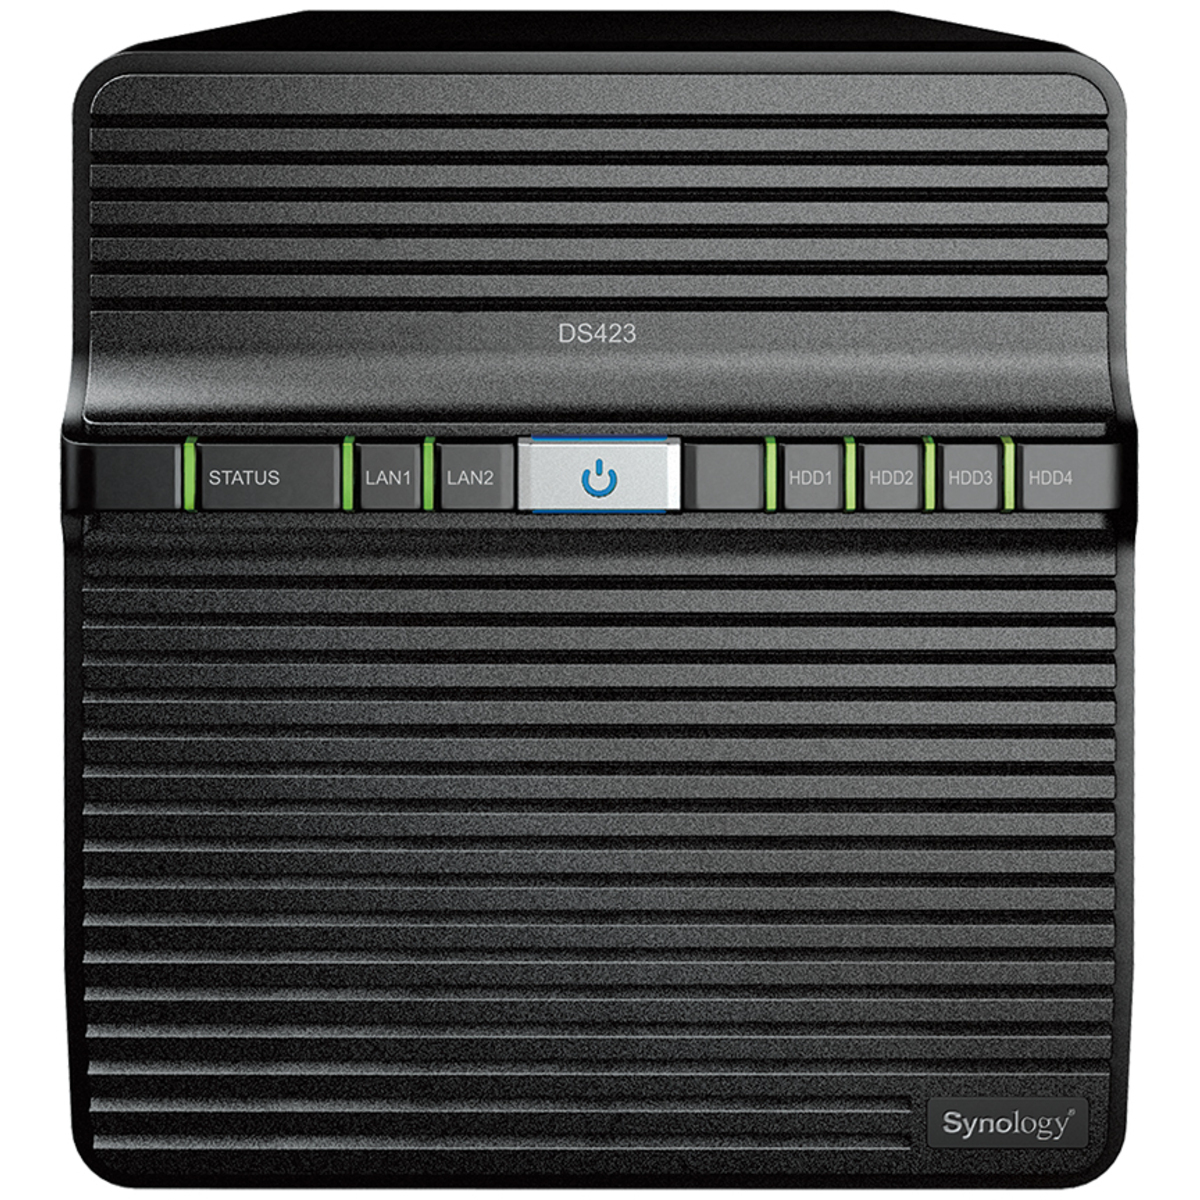 Synology DiskStation DS423 32tb 4-Bay Desktop Personal / Basic Home / Small Office NAS - Network Attached Storage Device 4x8tb Seagate IronWolf Pro ST8000NT001 3.5 7200rpm SATA 6Gb/s HDD NAS Class Drives Installed - Burn-In Tested - ON SALE DiskStation DS423